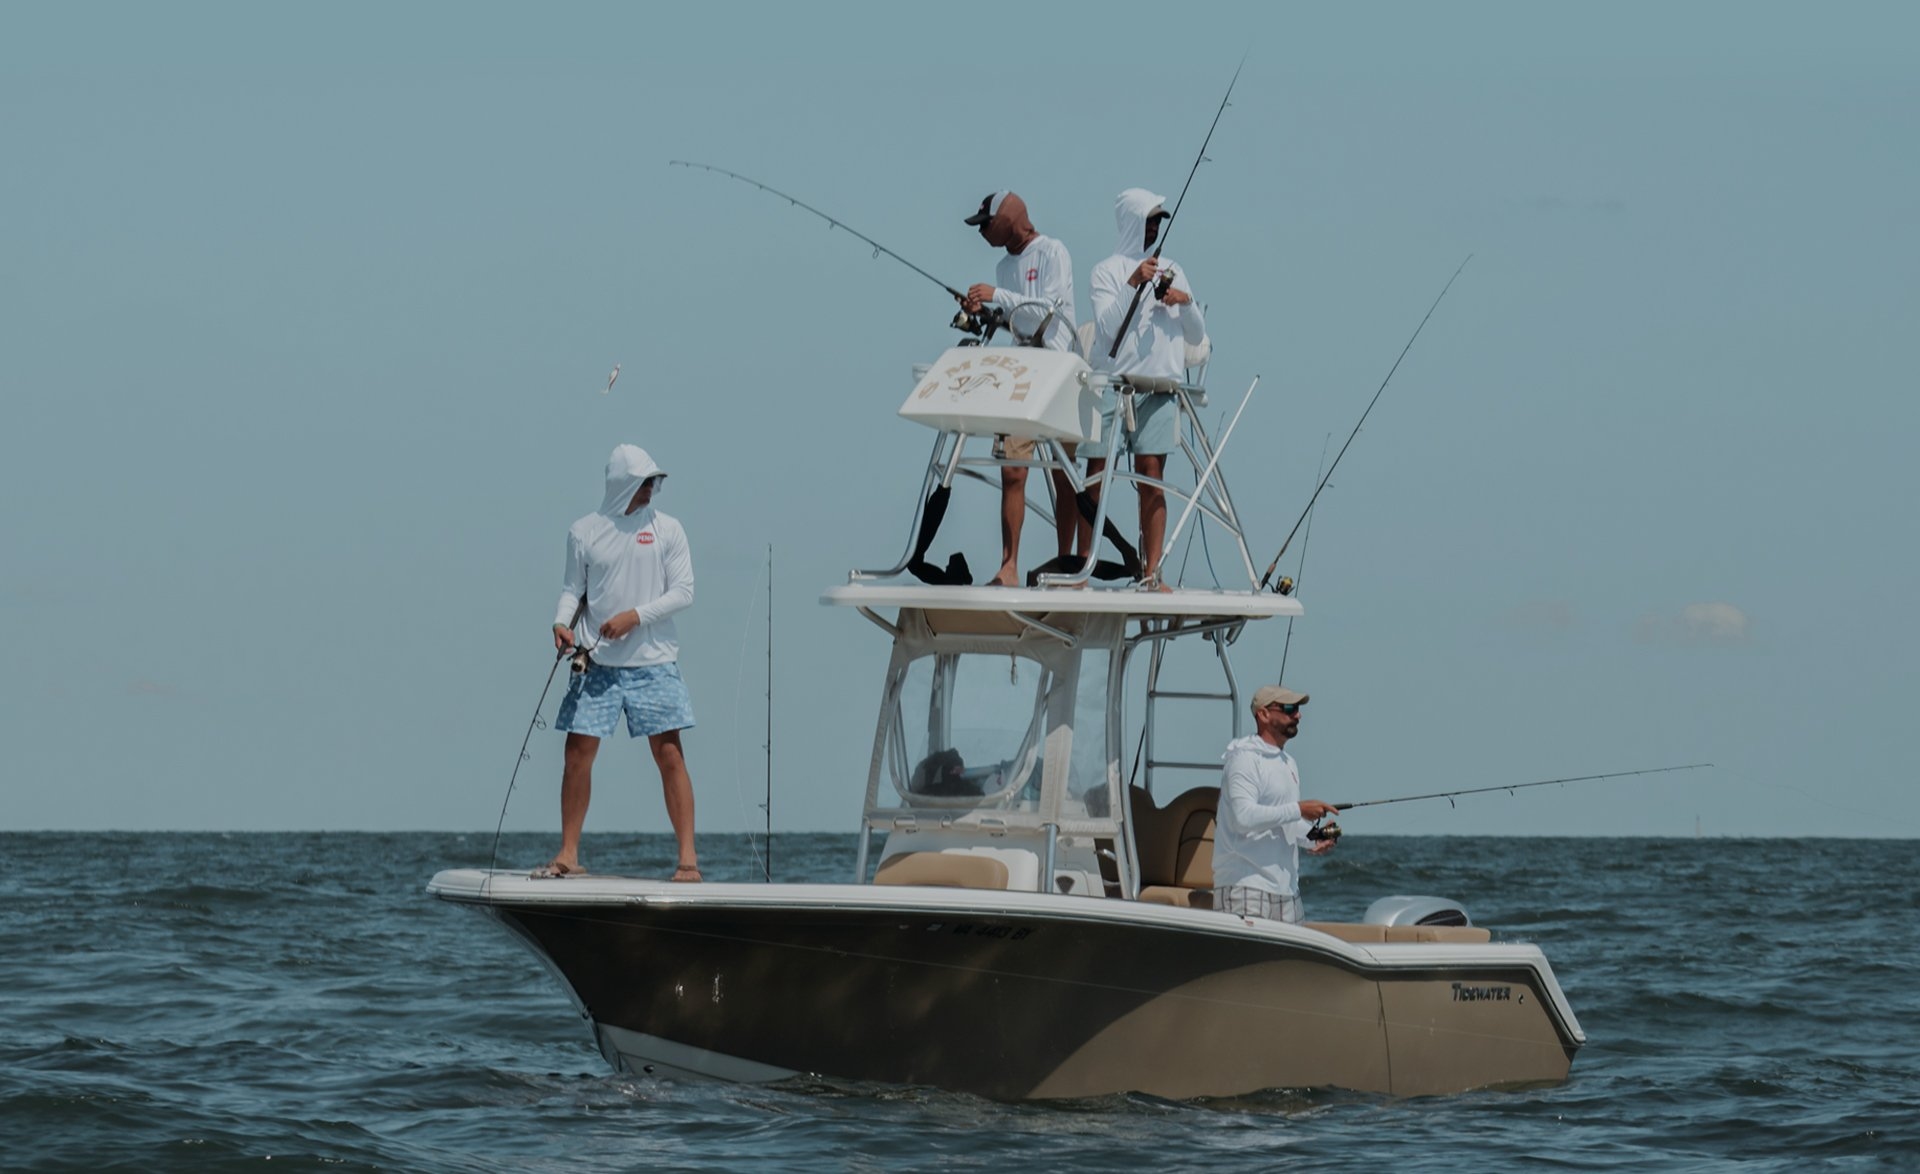 Pro Saltwater Fishing team in action.